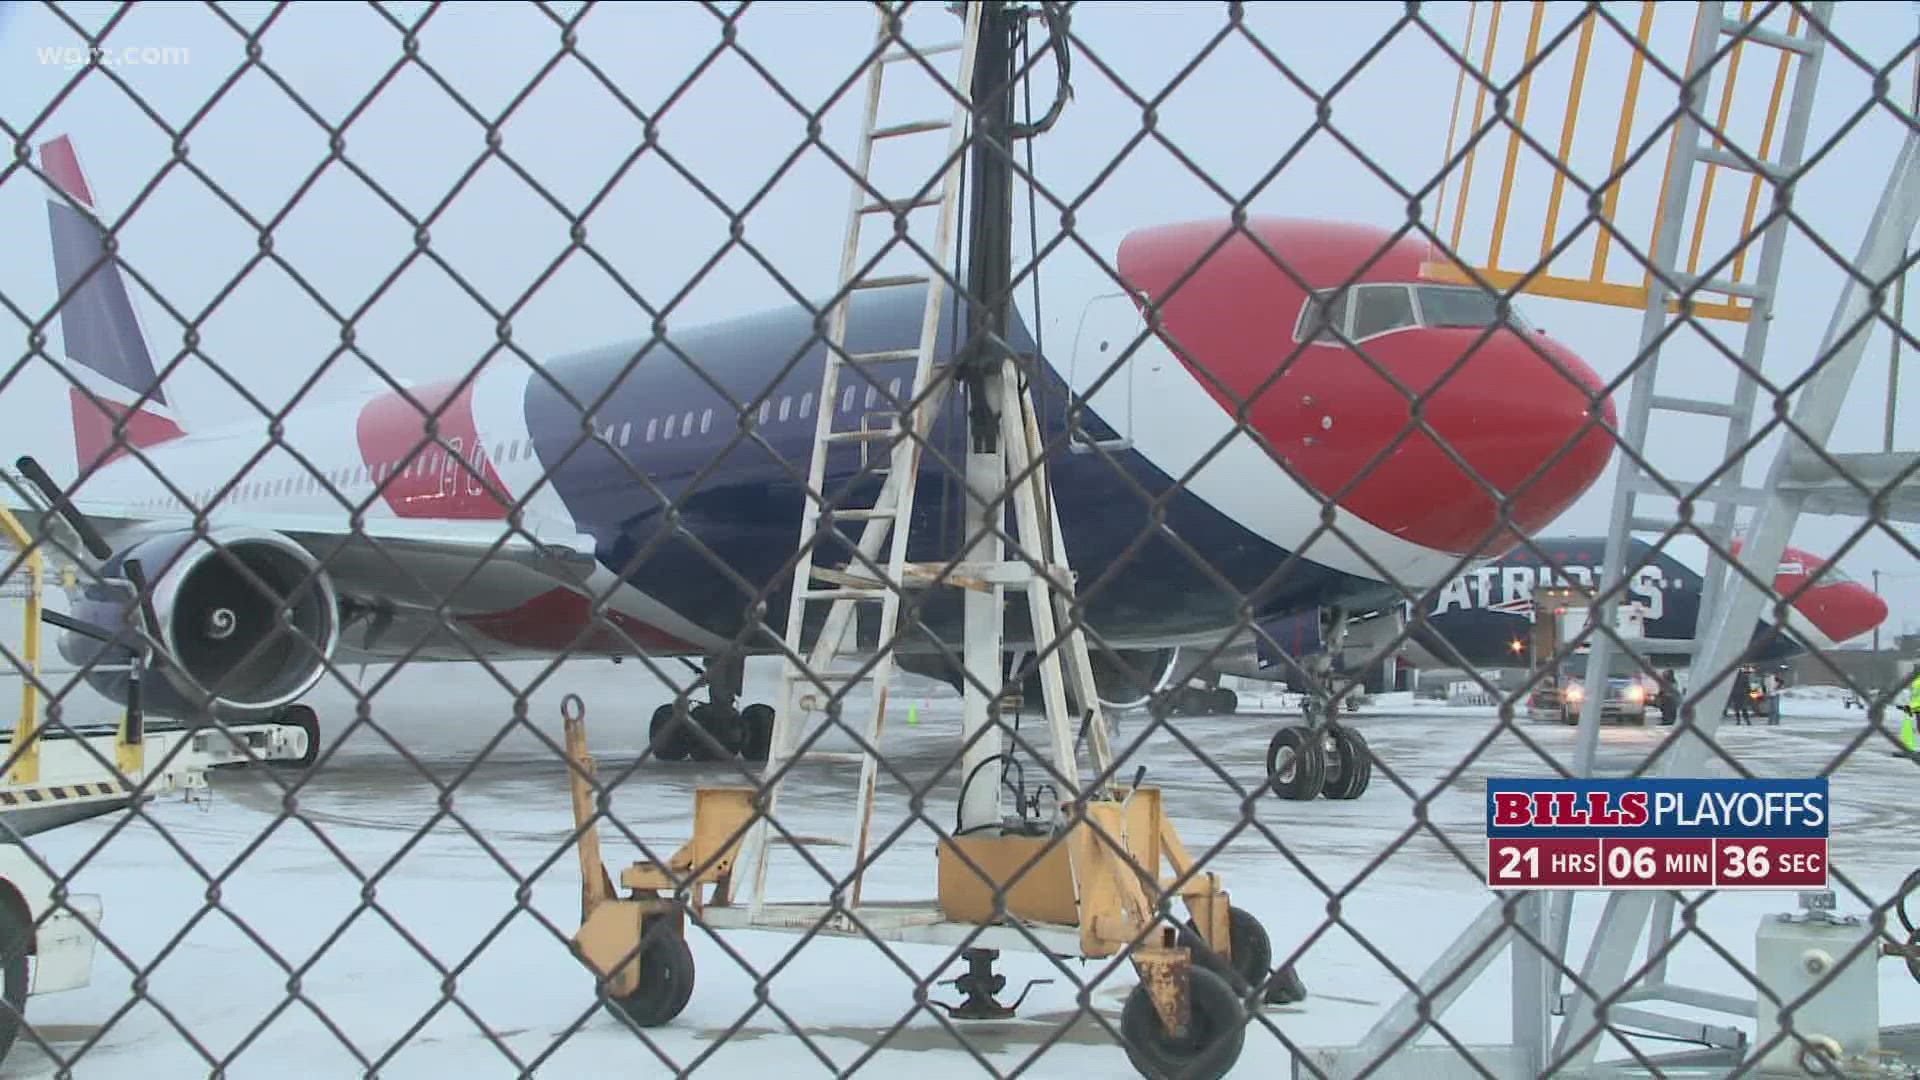 The ten Patriots fans that live in Western New York greeted the teams two planes, yes the Patriots fly with two aircraft.